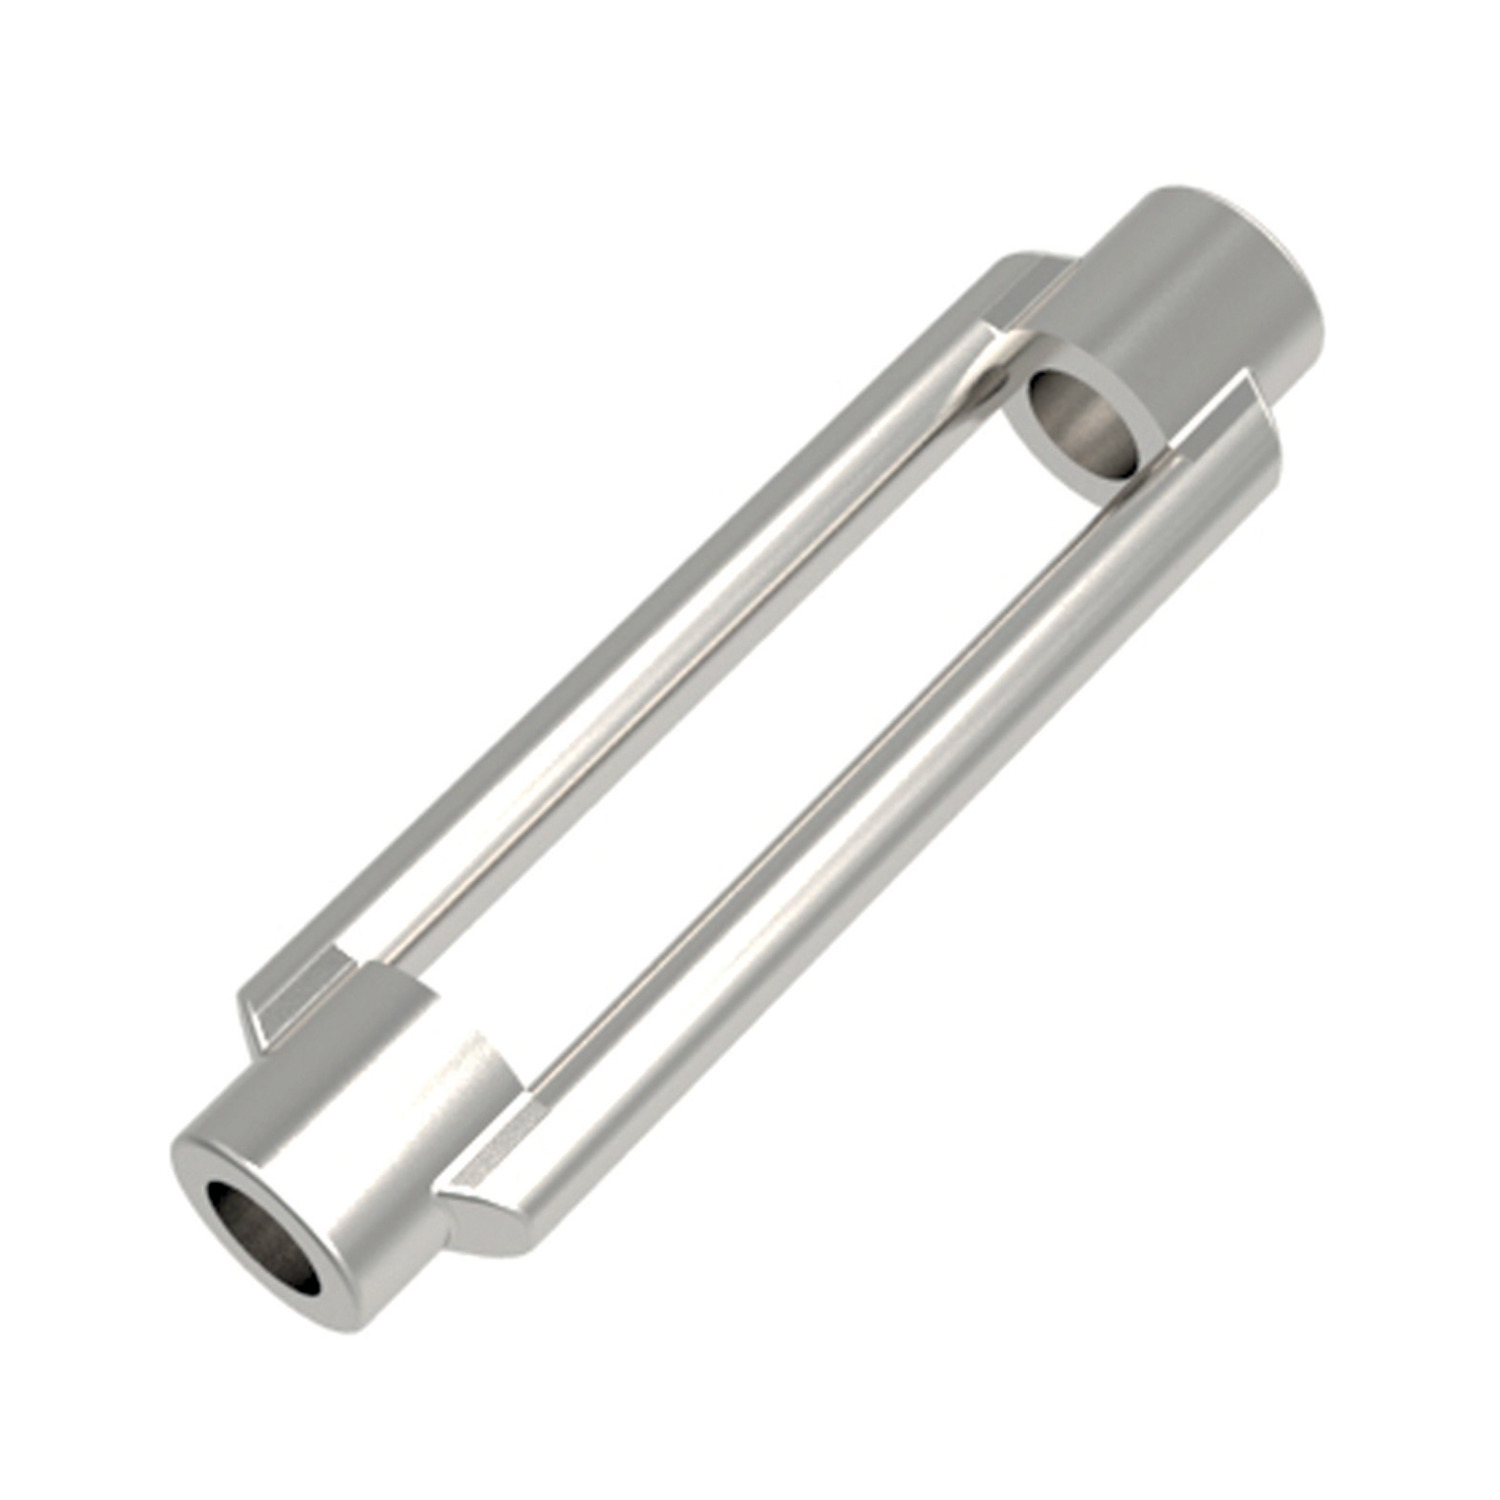 Turnbuckles A4 Stainless steel open turnbuckles. Manufactured to DIN 1480. Sizes ranging from M5 to M24. Lengths from 70mm to 255mm.